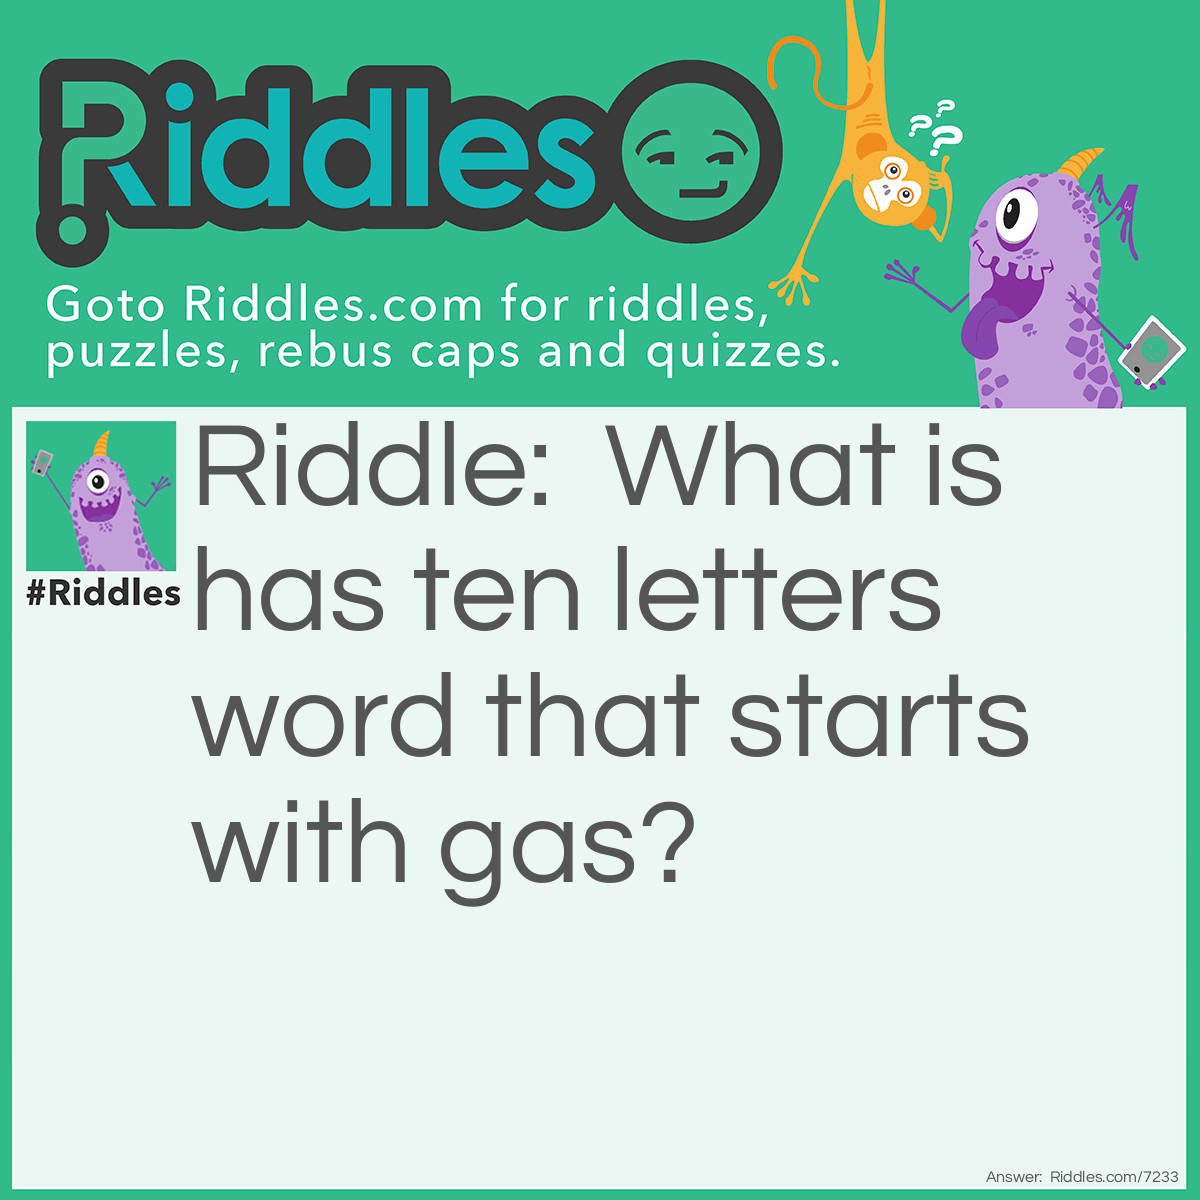 Riddle: What is has ten letters word that starts with gas? Answer: Automobile.